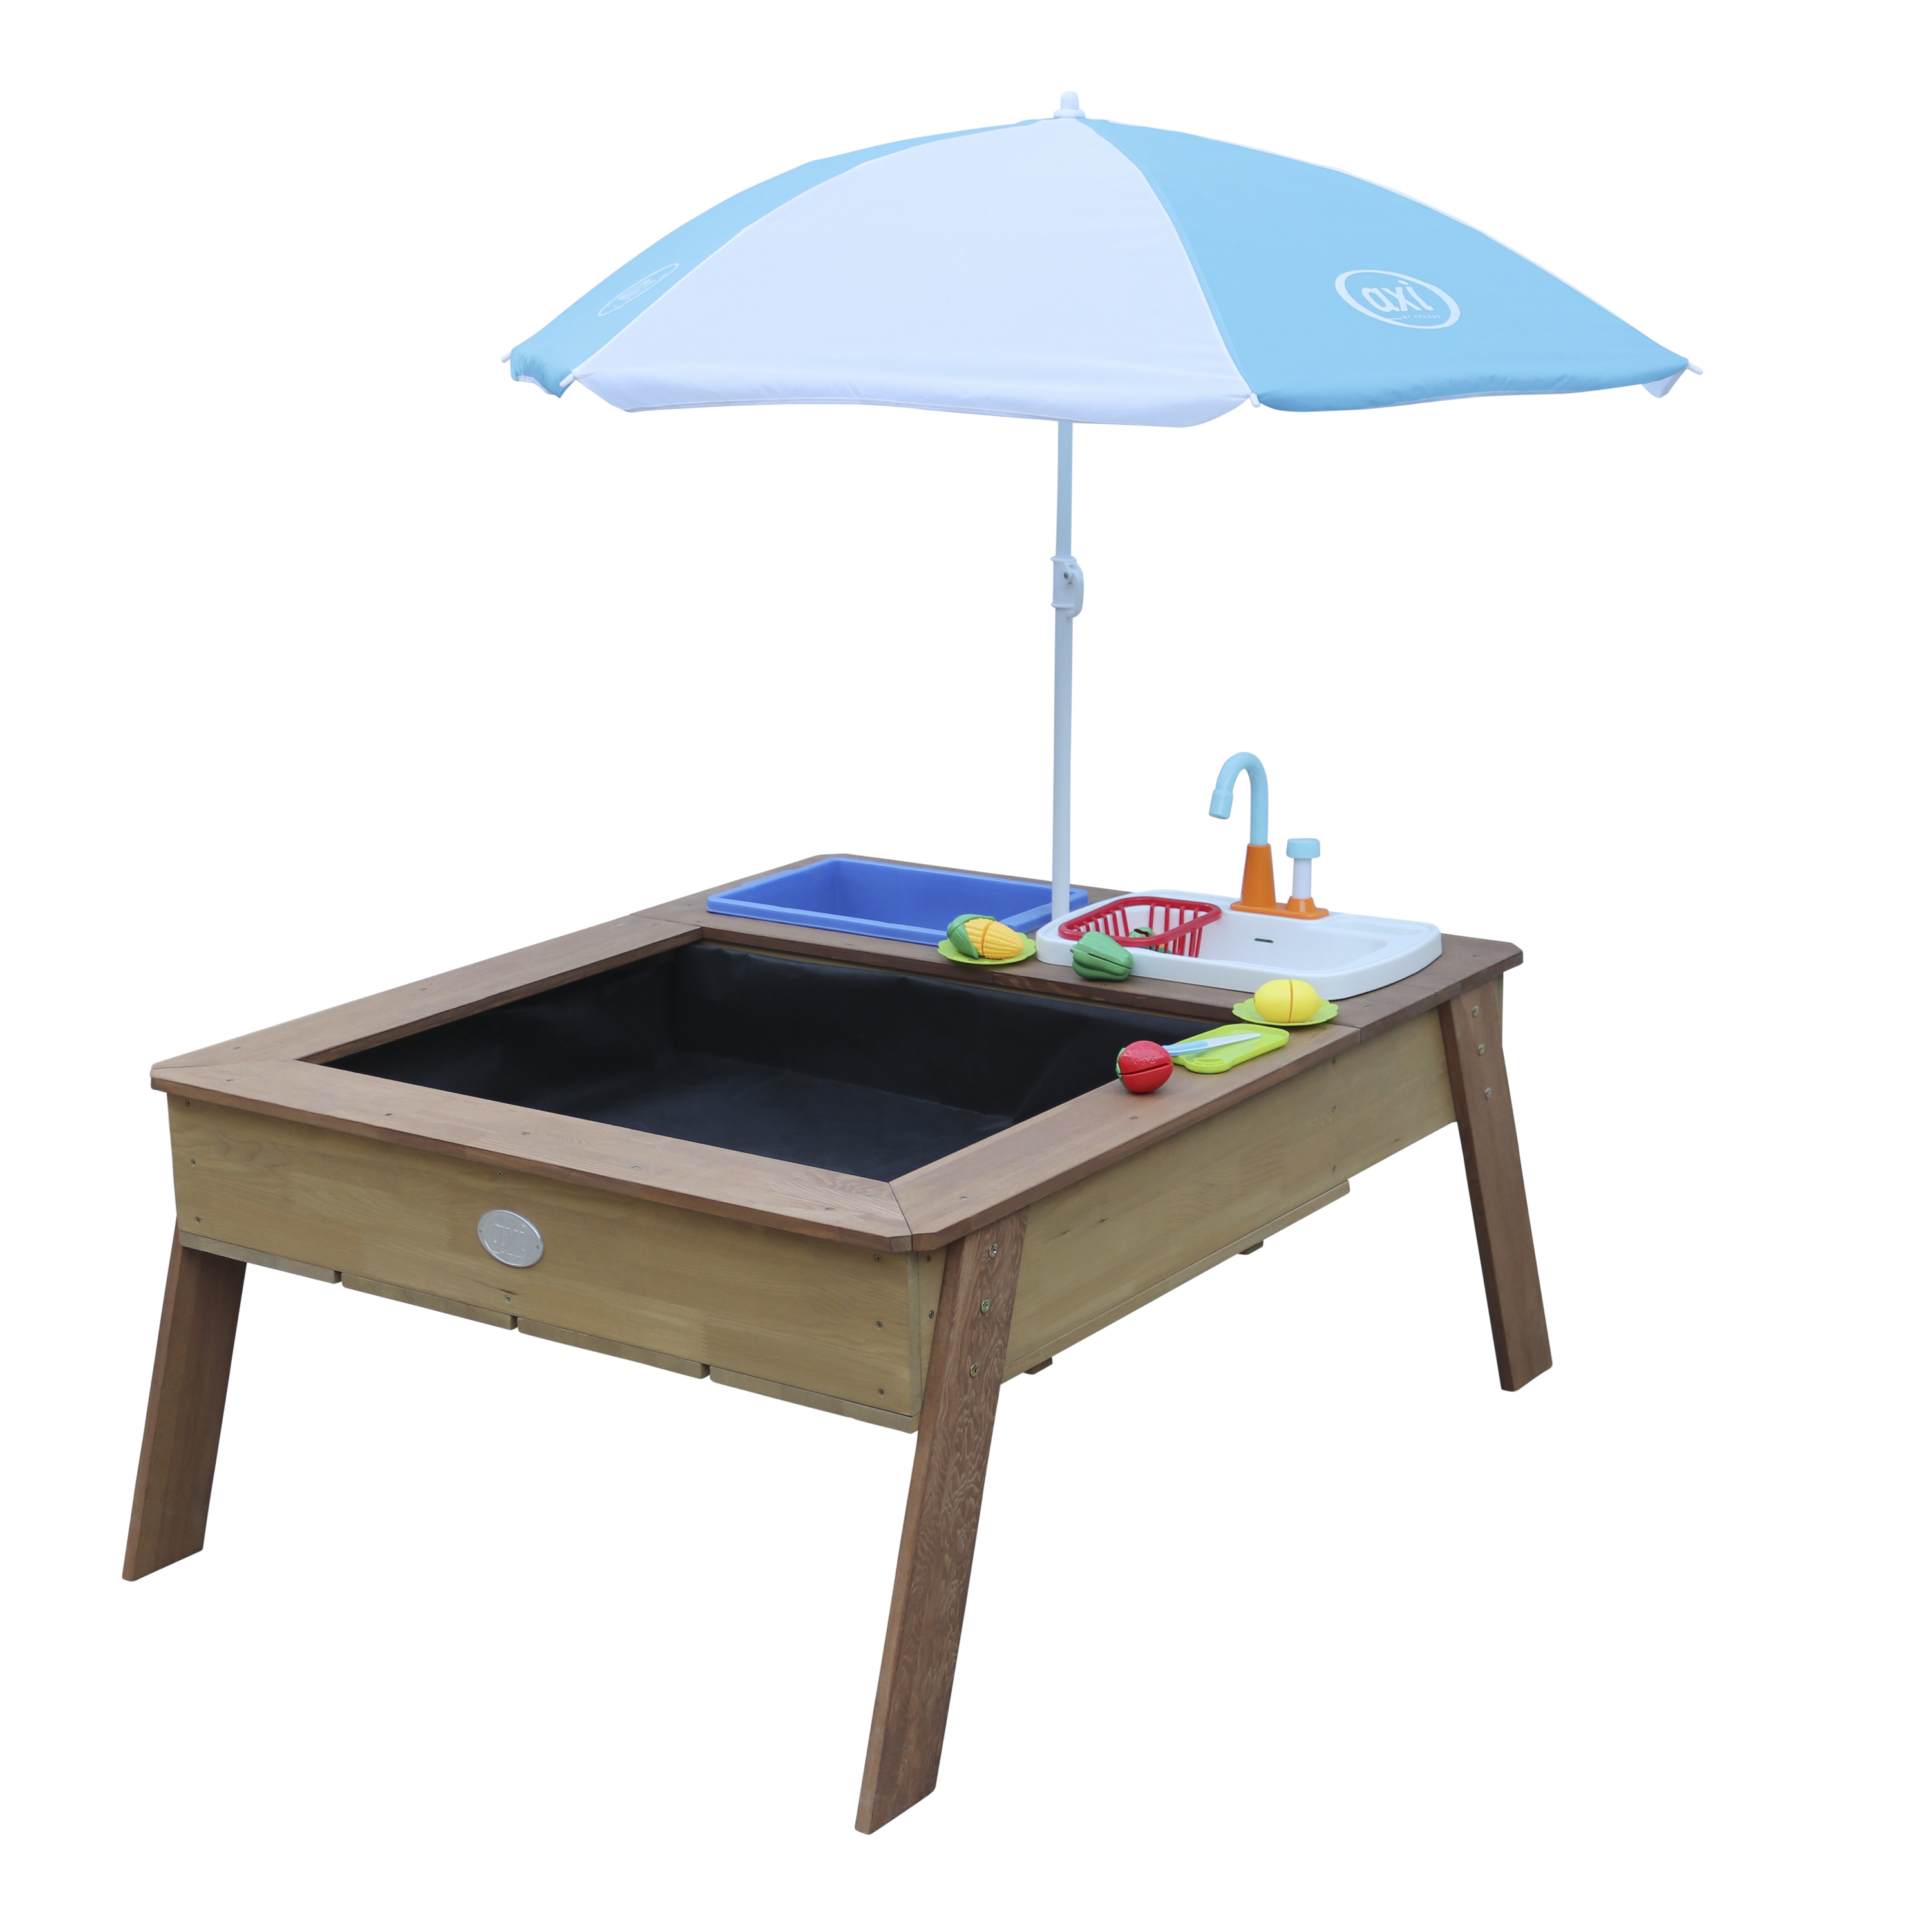 Linda Sand & Water Table with Play Kitchen sink Brown - Umbrella Blue/White